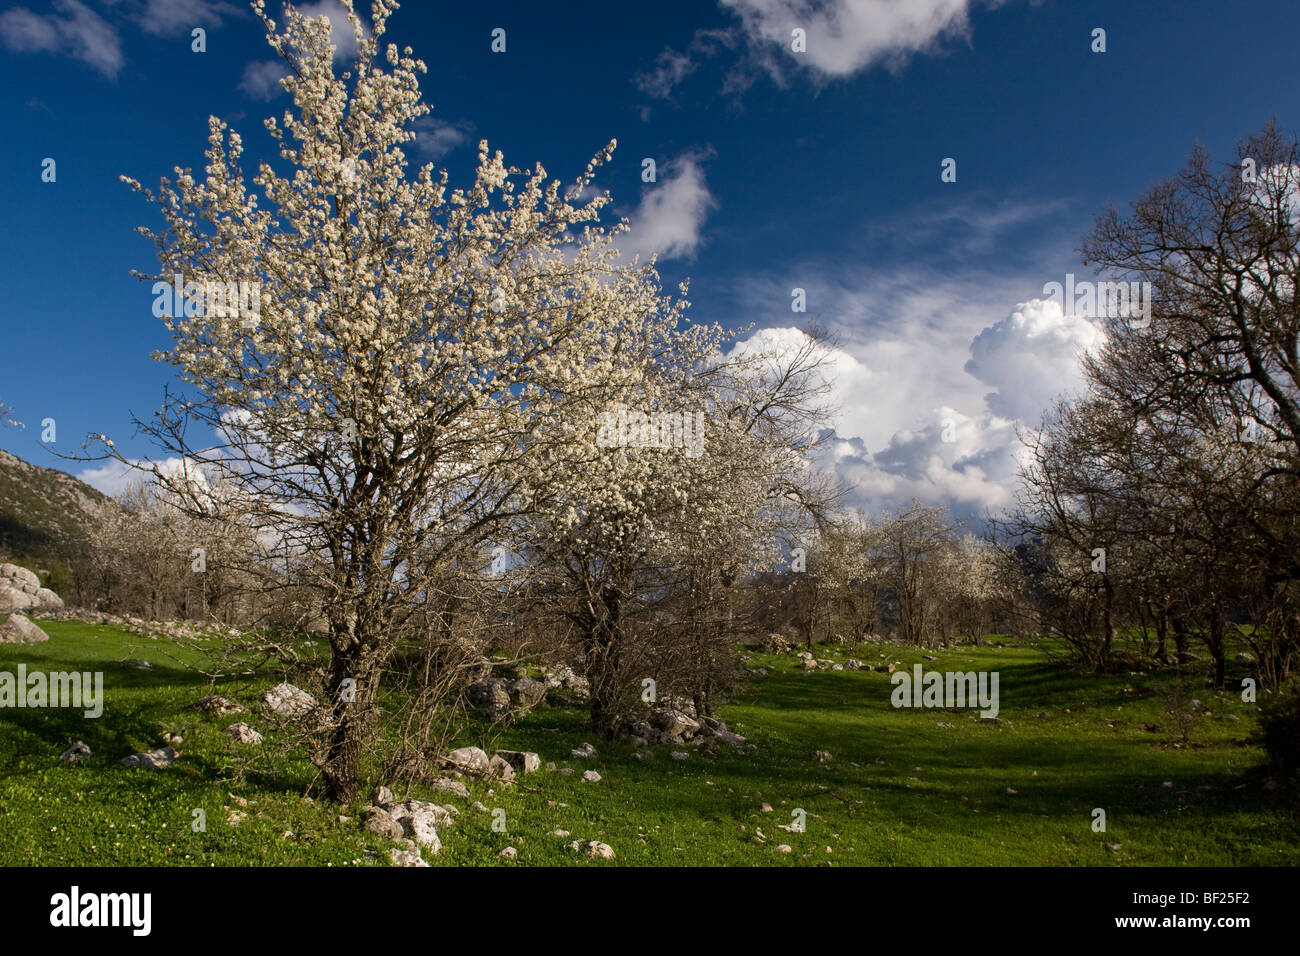 Semi-wild plums in flower near Ibradi, in stormy weather, in the Taurus Mountains, south Turkey. Stock Photo